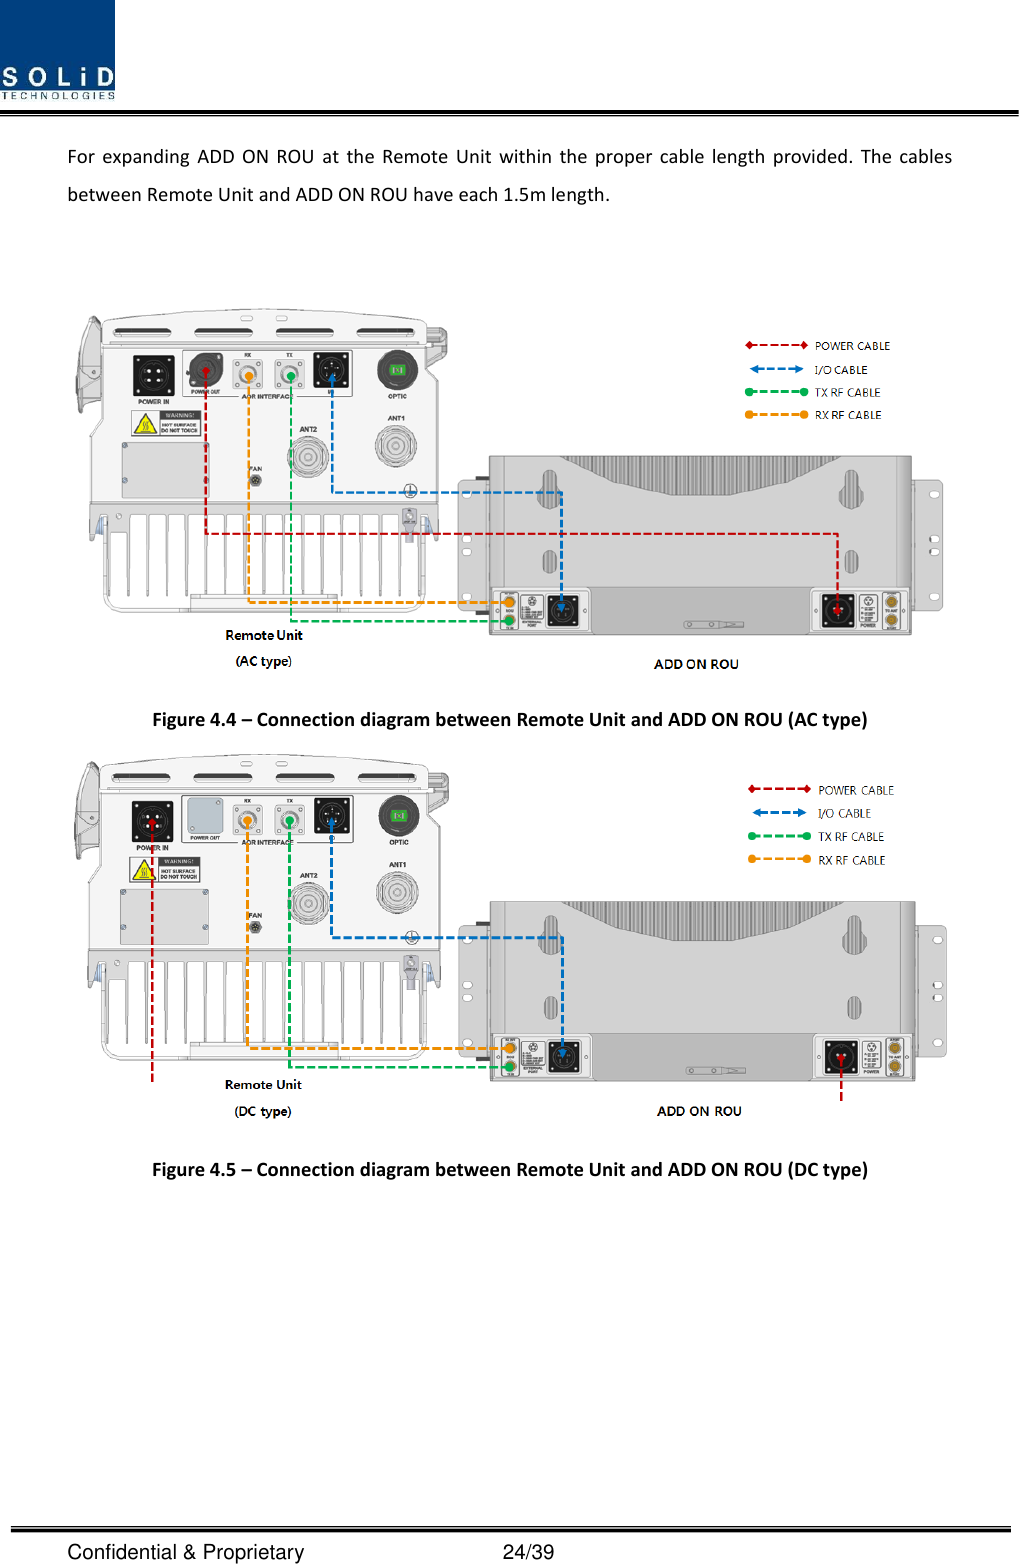  Confidential &amp; Proprietary                                      24/39 For expanding  ADD ON ROU  at  the  Remote  Unit within the proper cable length provided. The cables between Remote Unit and ADD ON ROU have each 1.5m length.    Figure 4.4 – Connection diagram between Remote Unit and ADD ON ROU (AC type)  Figure 4.5 – Connection diagram between Remote Unit and ADD ON ROU (DC type)   